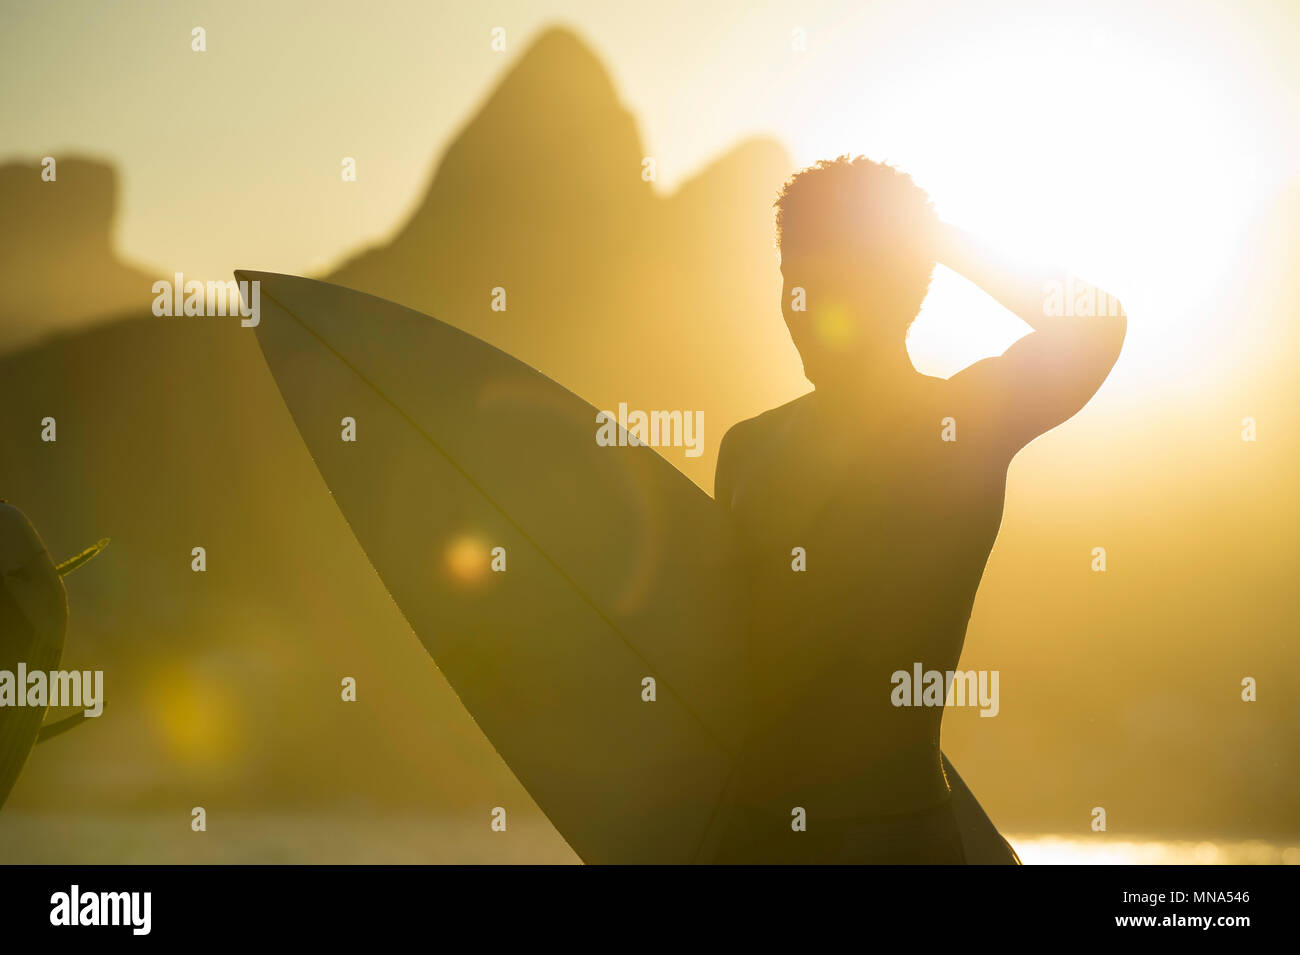 RIO DE JANEIRO - MARCH 20, 2017: Sunset silhouette of young surfer with surfboard at Arpoador with two brothers mountains in the background in Ipanema Stock Photo